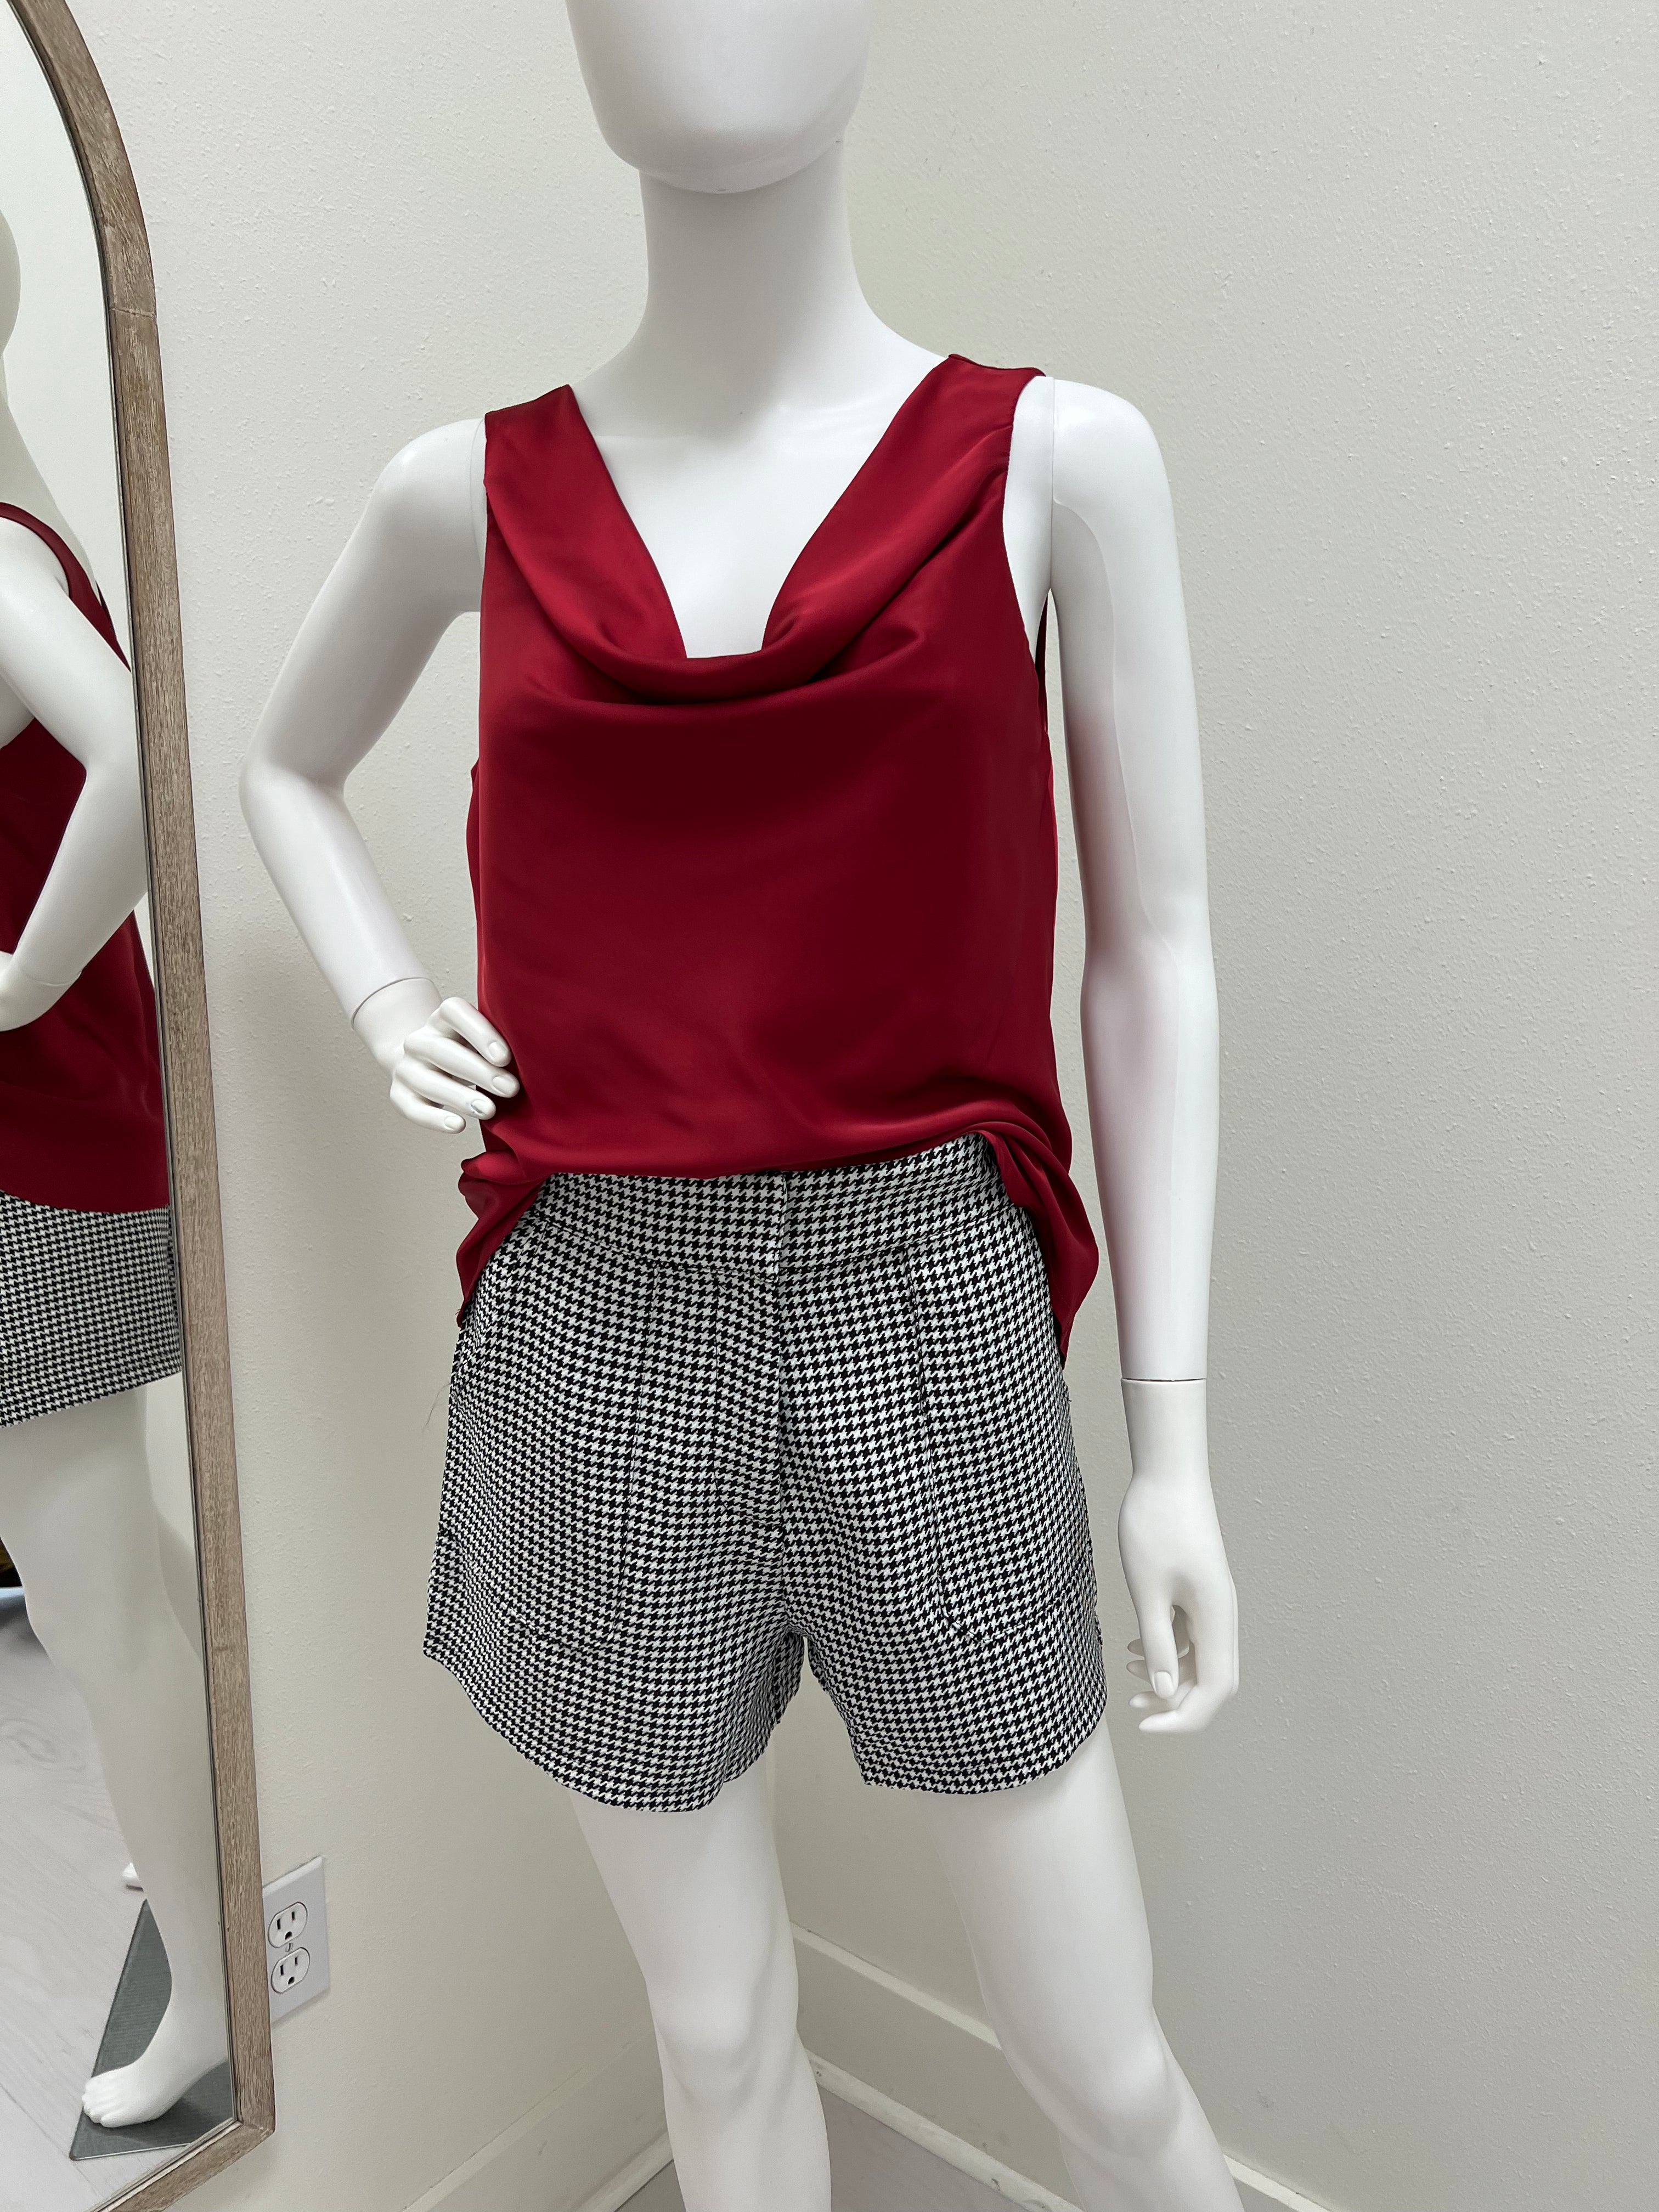 The Houndstooth Shorts